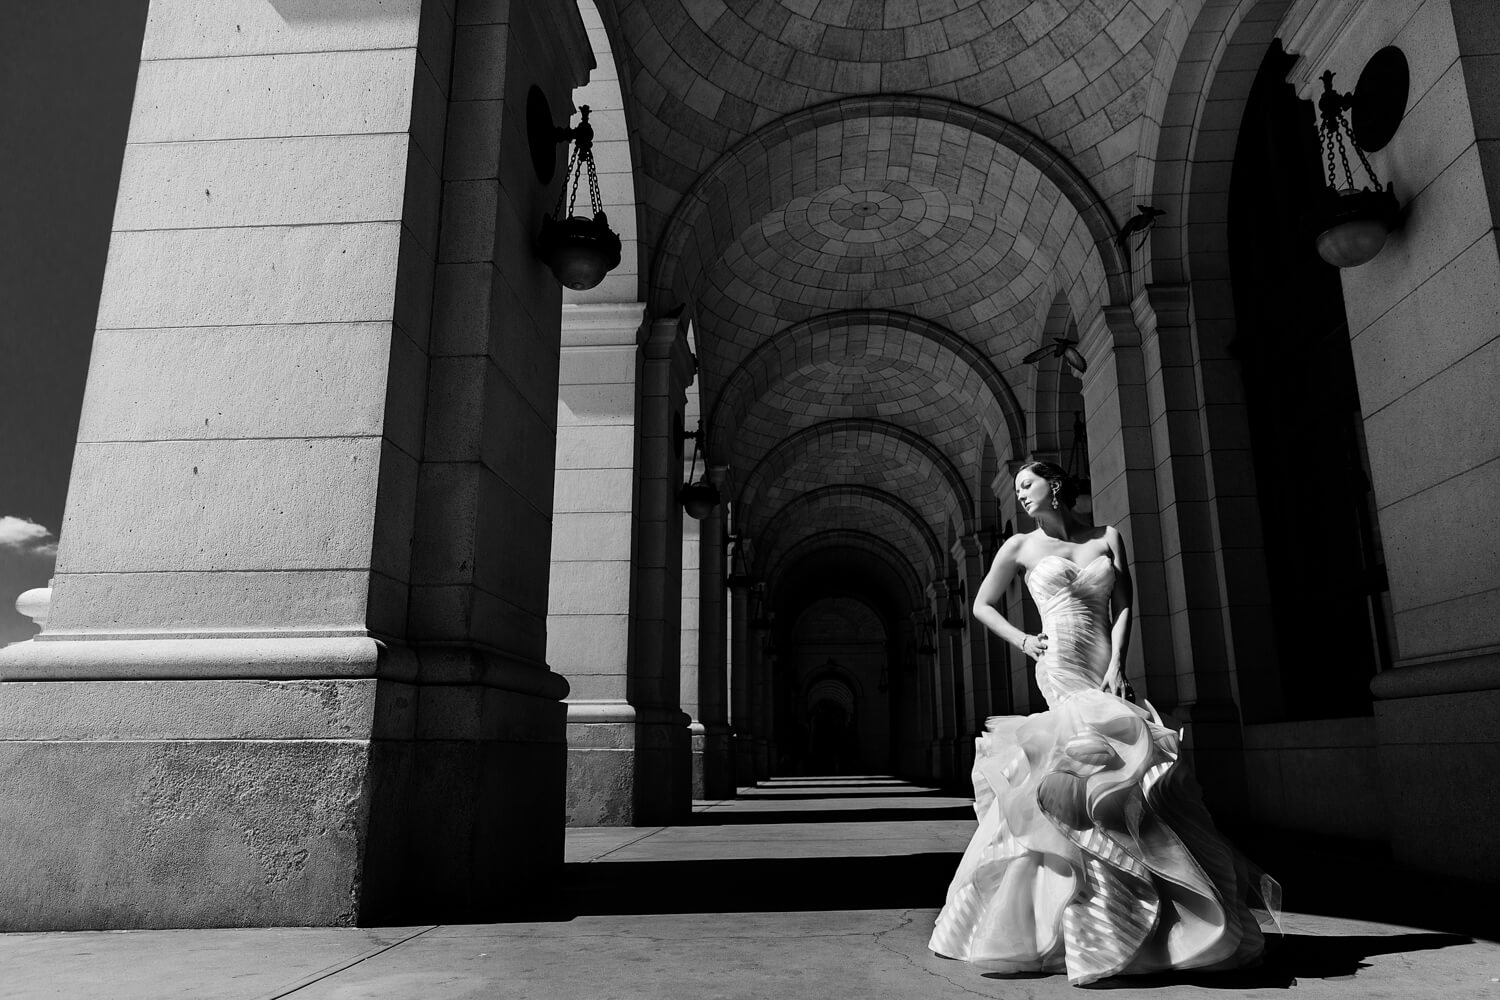 This bridal portrait was taken under the union market arches, This is a commonly photographed area but we took it to the next level, lighting the bride with the sun and having her stand in an editorial pose, She looks strong and beautiful, This is a dramatic black and white photo, Procopio Photography, best top Washington DC photographer, best top Maryland photographer, best top Virginia photographer, best top DMV photographer, best top wedding photographer, best top commercial photographer, best top portrait photographer, best top boudoir photographer, modern fine art portraits, dramatic, unique, different, bold, editorial, photojournalism, award winning photographer, published photographer, memorable images, be different, stand out